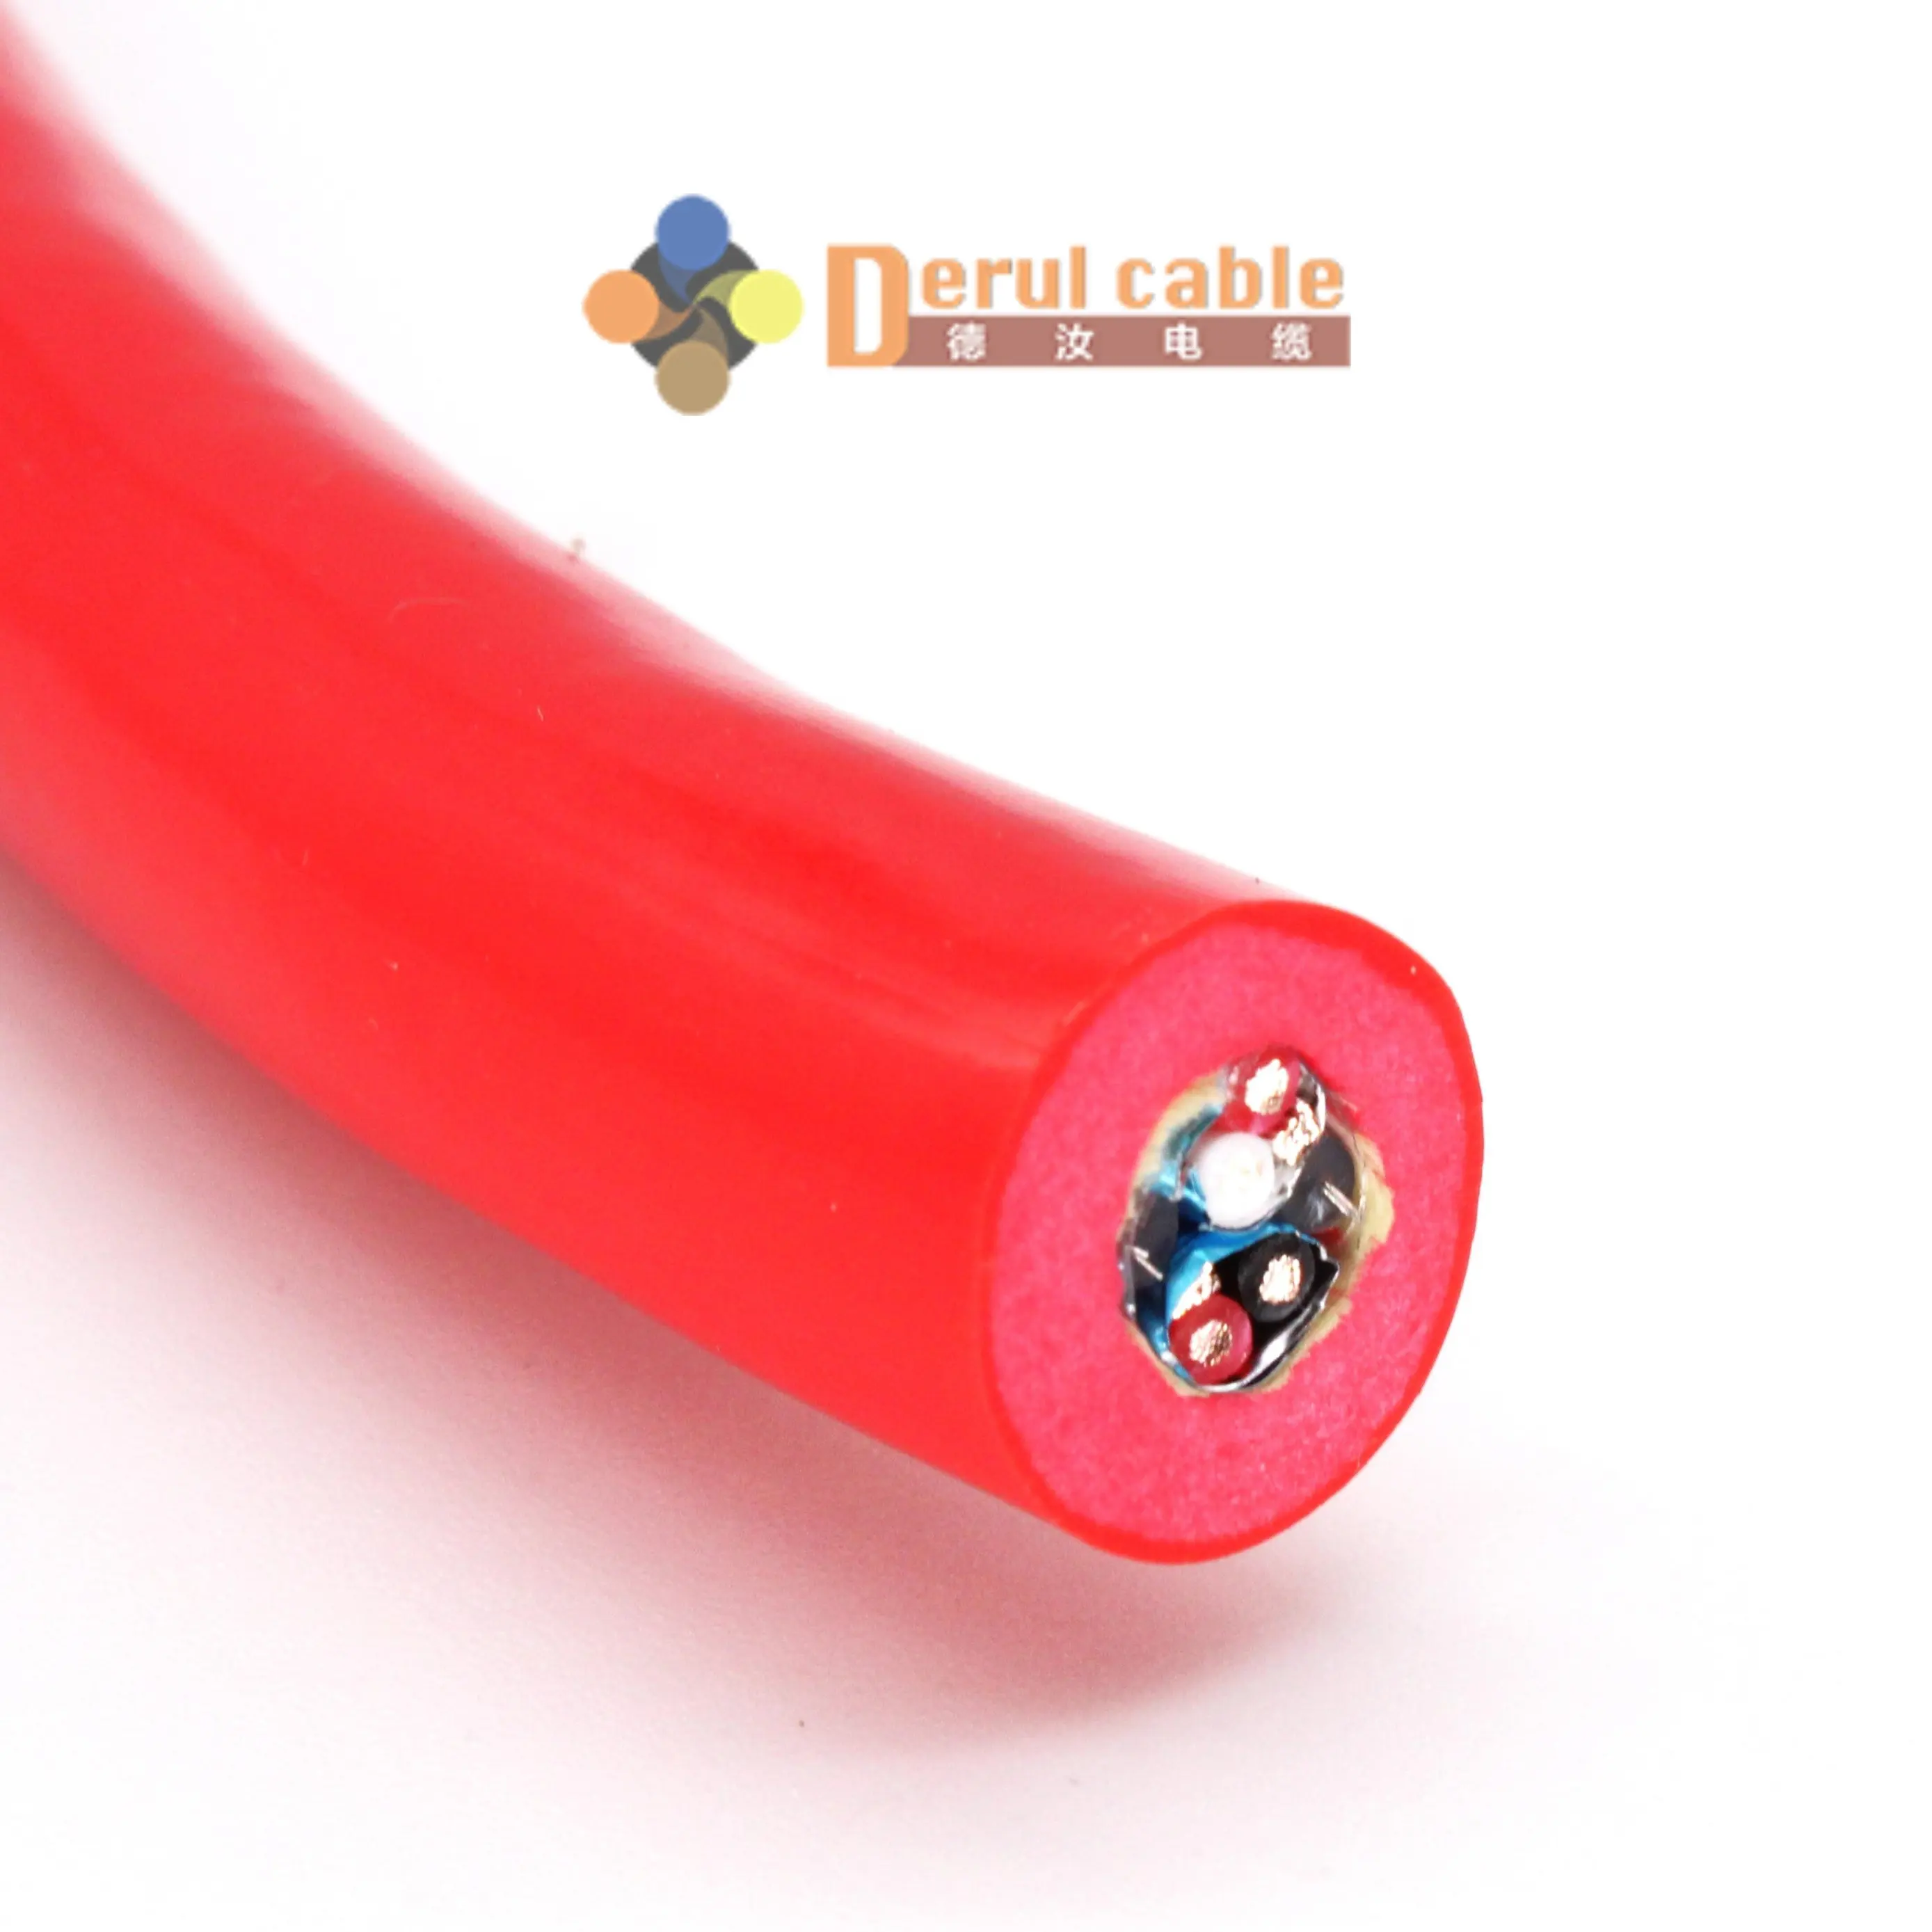 Neutrally Buoyant Cable ROV tether cable